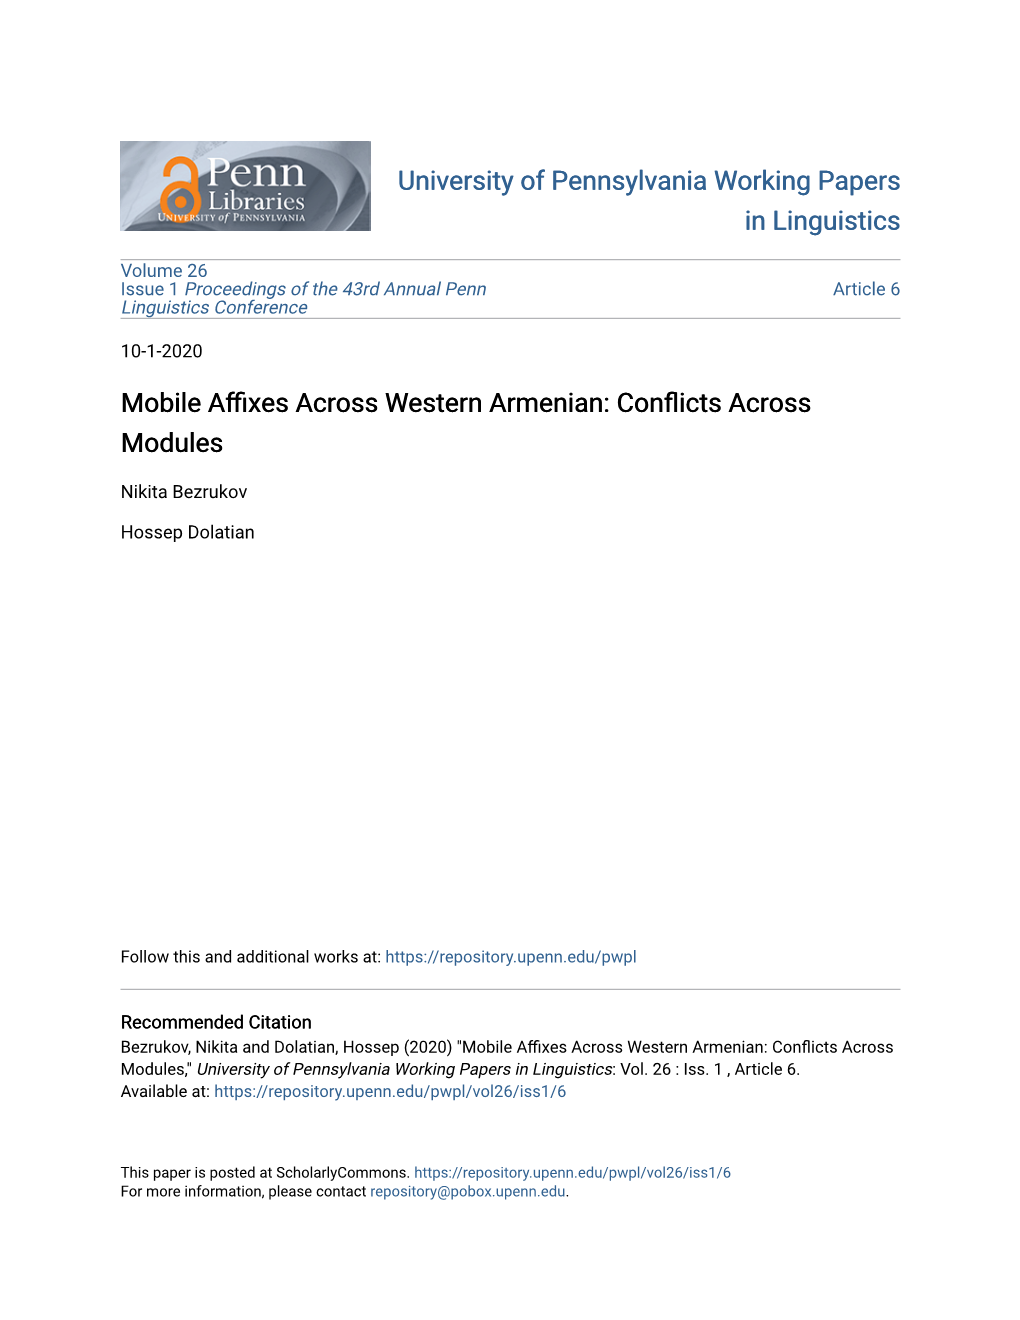 Mobile Affixes Across Western Armenian: Conflicts Across Modules